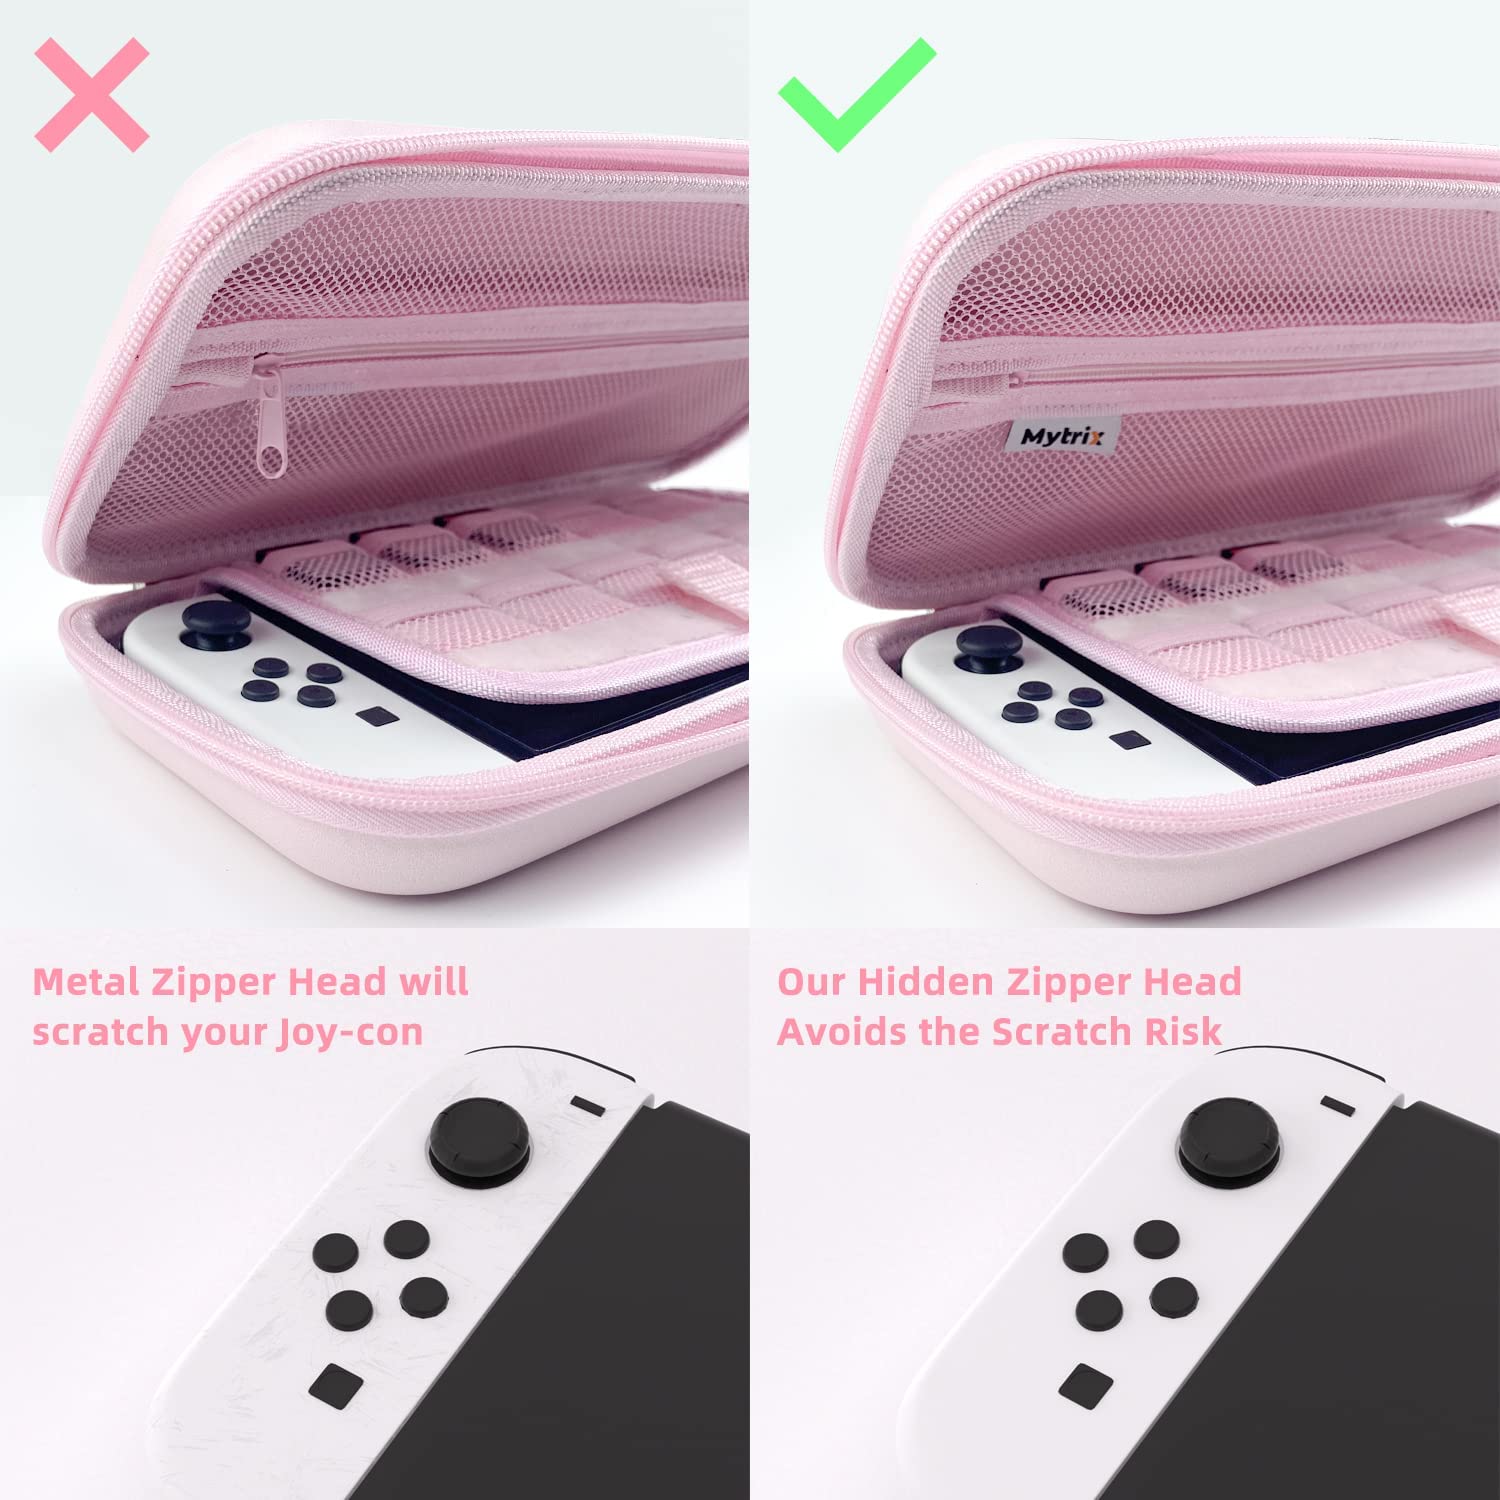 Sakura Pink Mytrix Carrying Case 4 in 1 Bundle for Nintendo Switch OLED, Skin Stickers, Screen Protector, 2 Joystick Caps